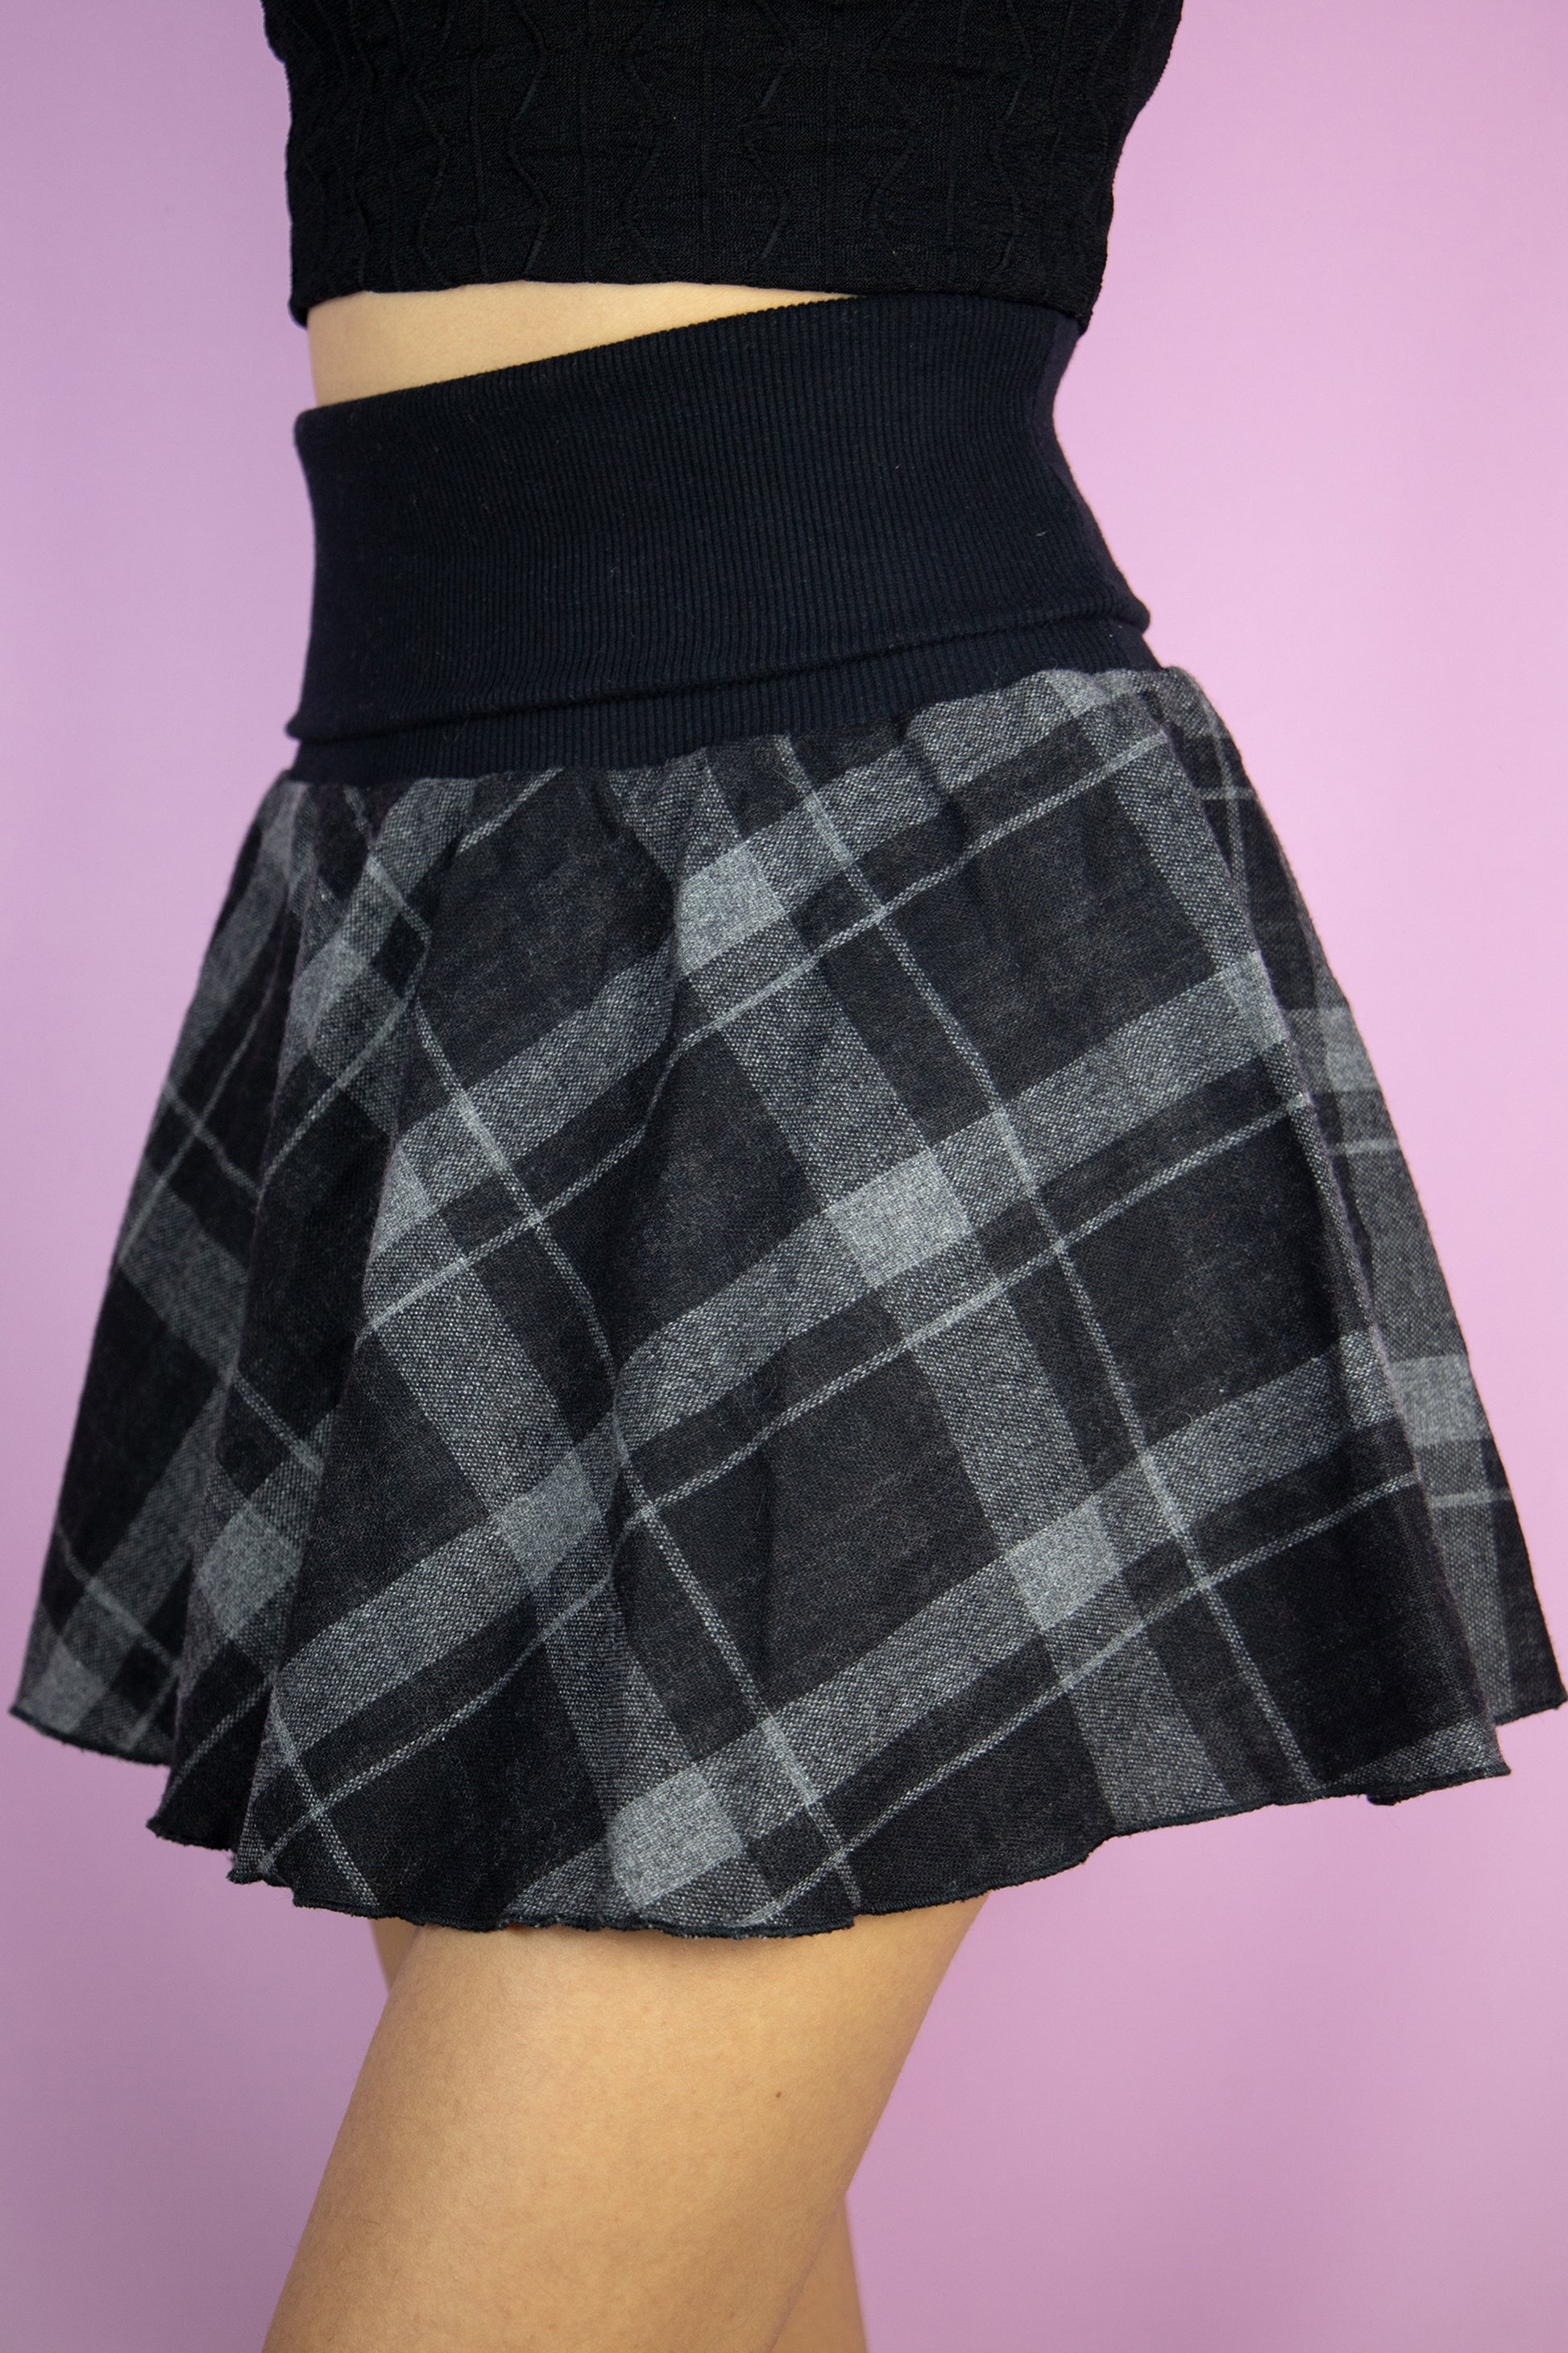 The Y2K Black Plaid Mini Skirt is a vintage black and gray check knit skirt with an elasticated ribbed waist. Fairy grunge 2000s goth mini skirt.